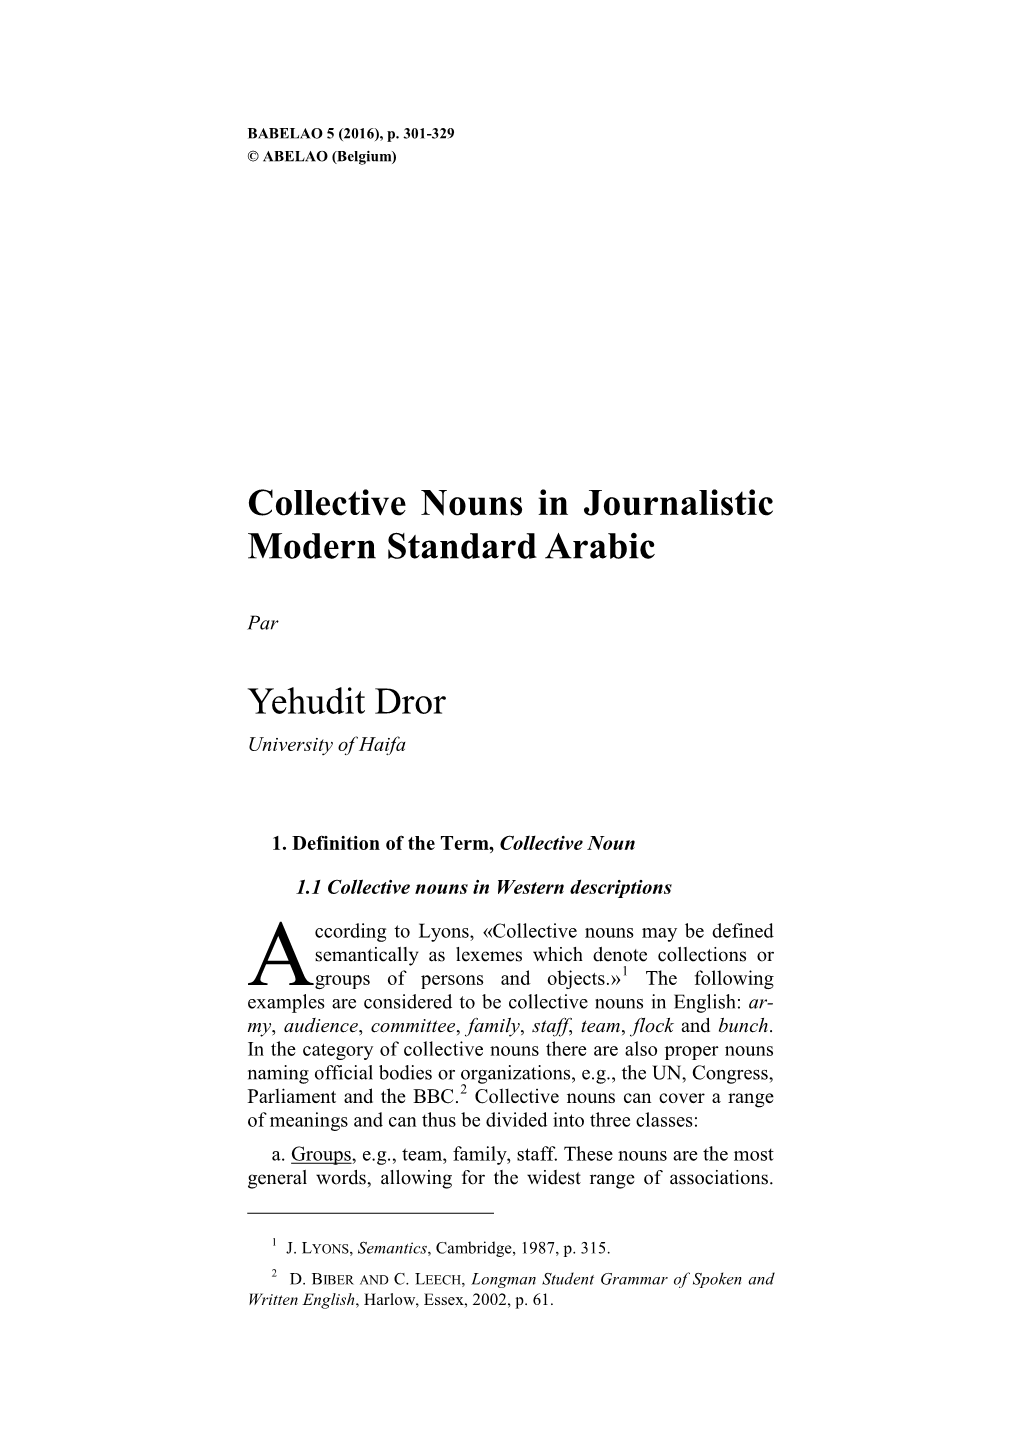 Collective Nouns in Journalistic Arabic 303